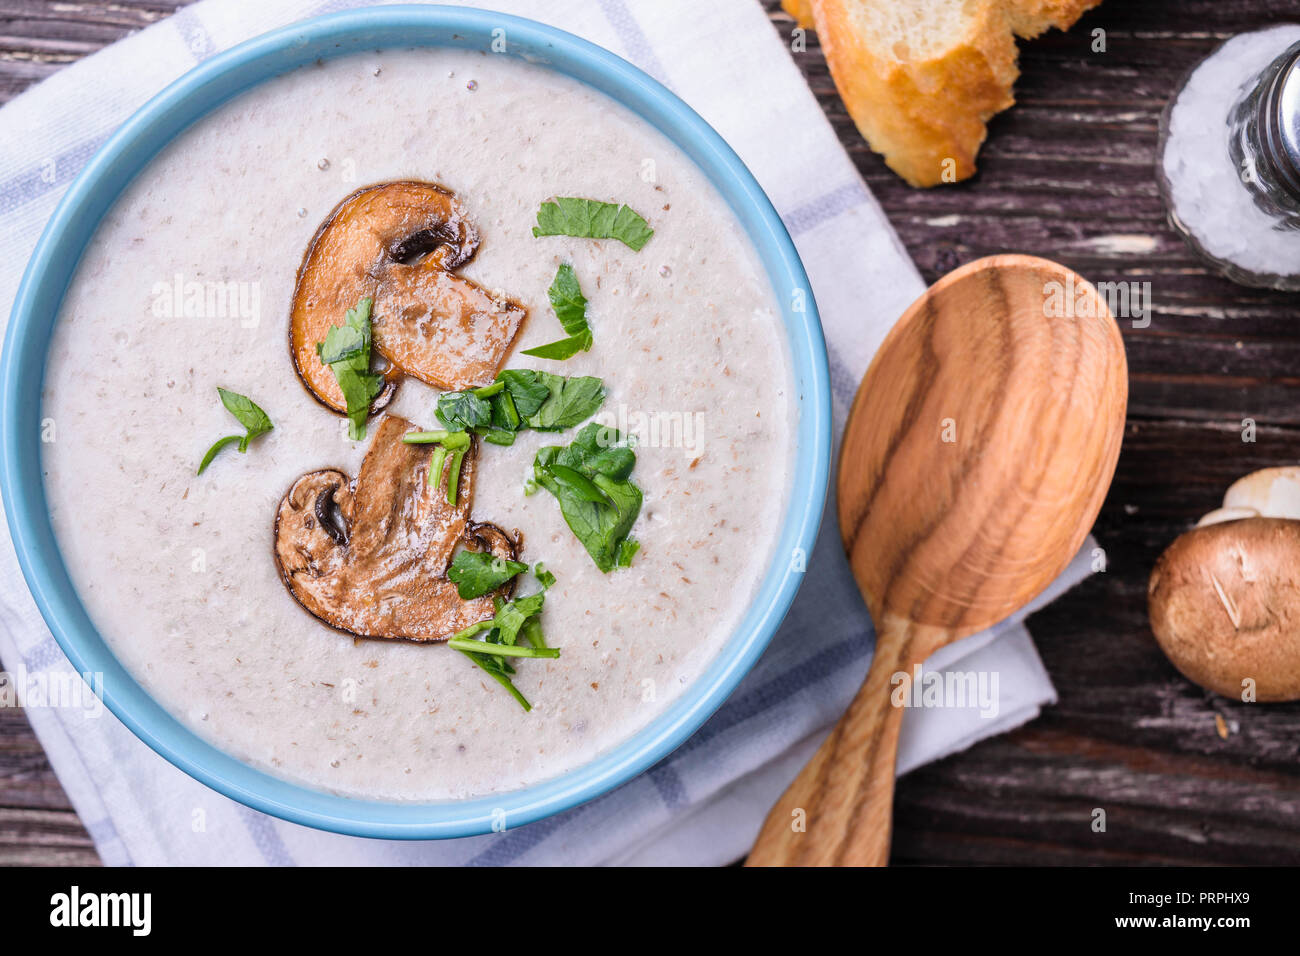 Delicious champignon mushroom cream soup puree on rustic wooden table. Top view. Close up view. Stock Photo